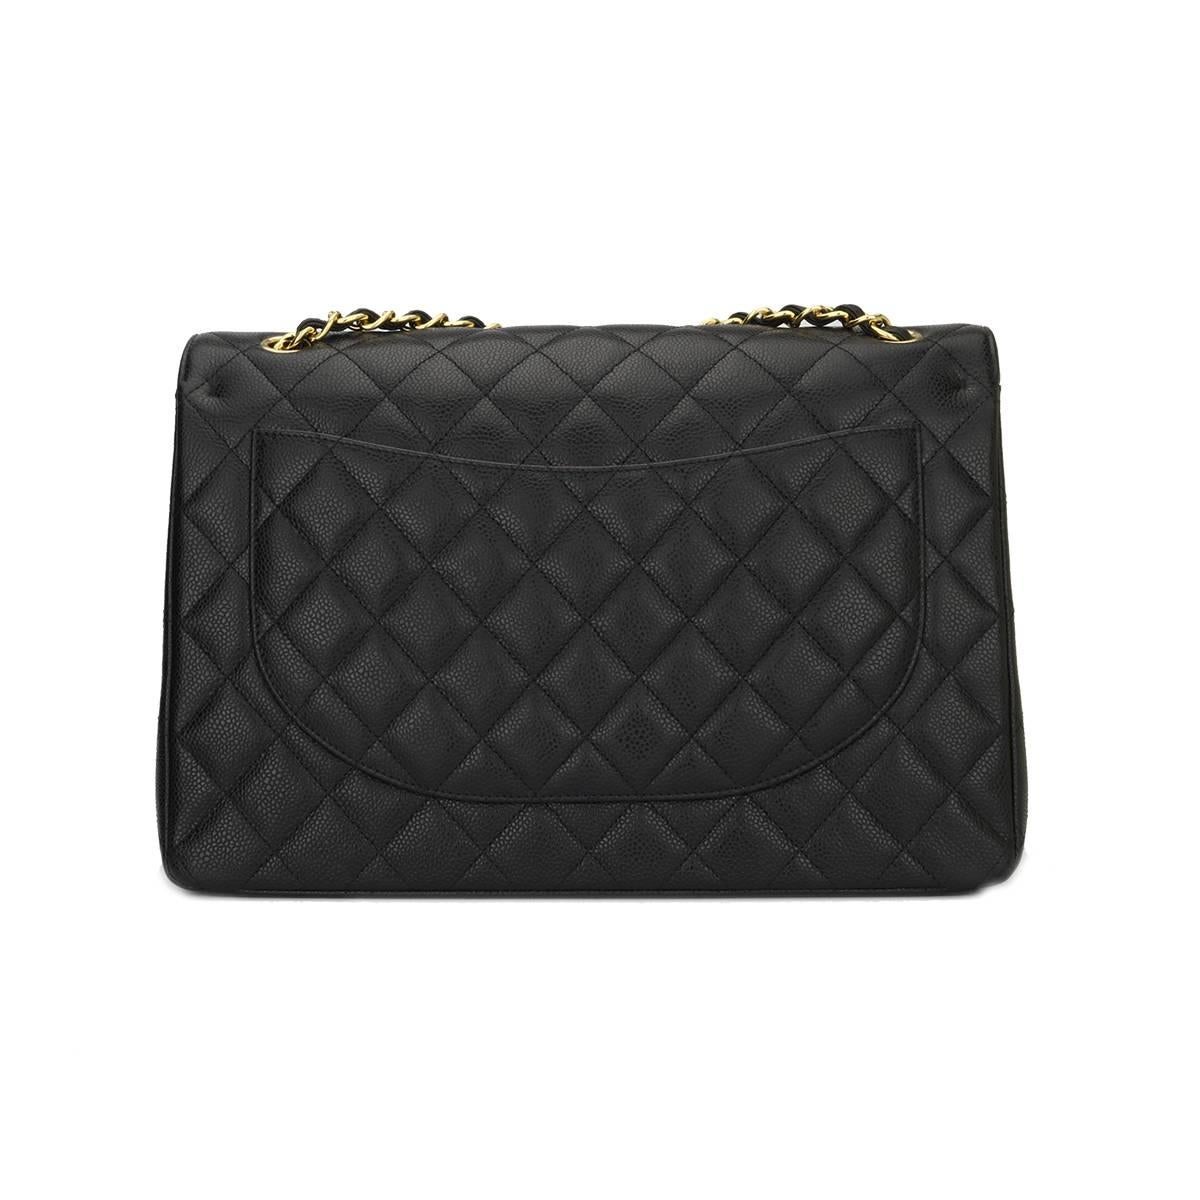 Authentic CHANEL Black Caviar Maxi Double Flap with Gold Hardware 2016.

This stunning bag is in a mint condition, the bag still holds its shape quite well and the hardware is still very shiny. Leather still smells fresh as if new.

Exterior